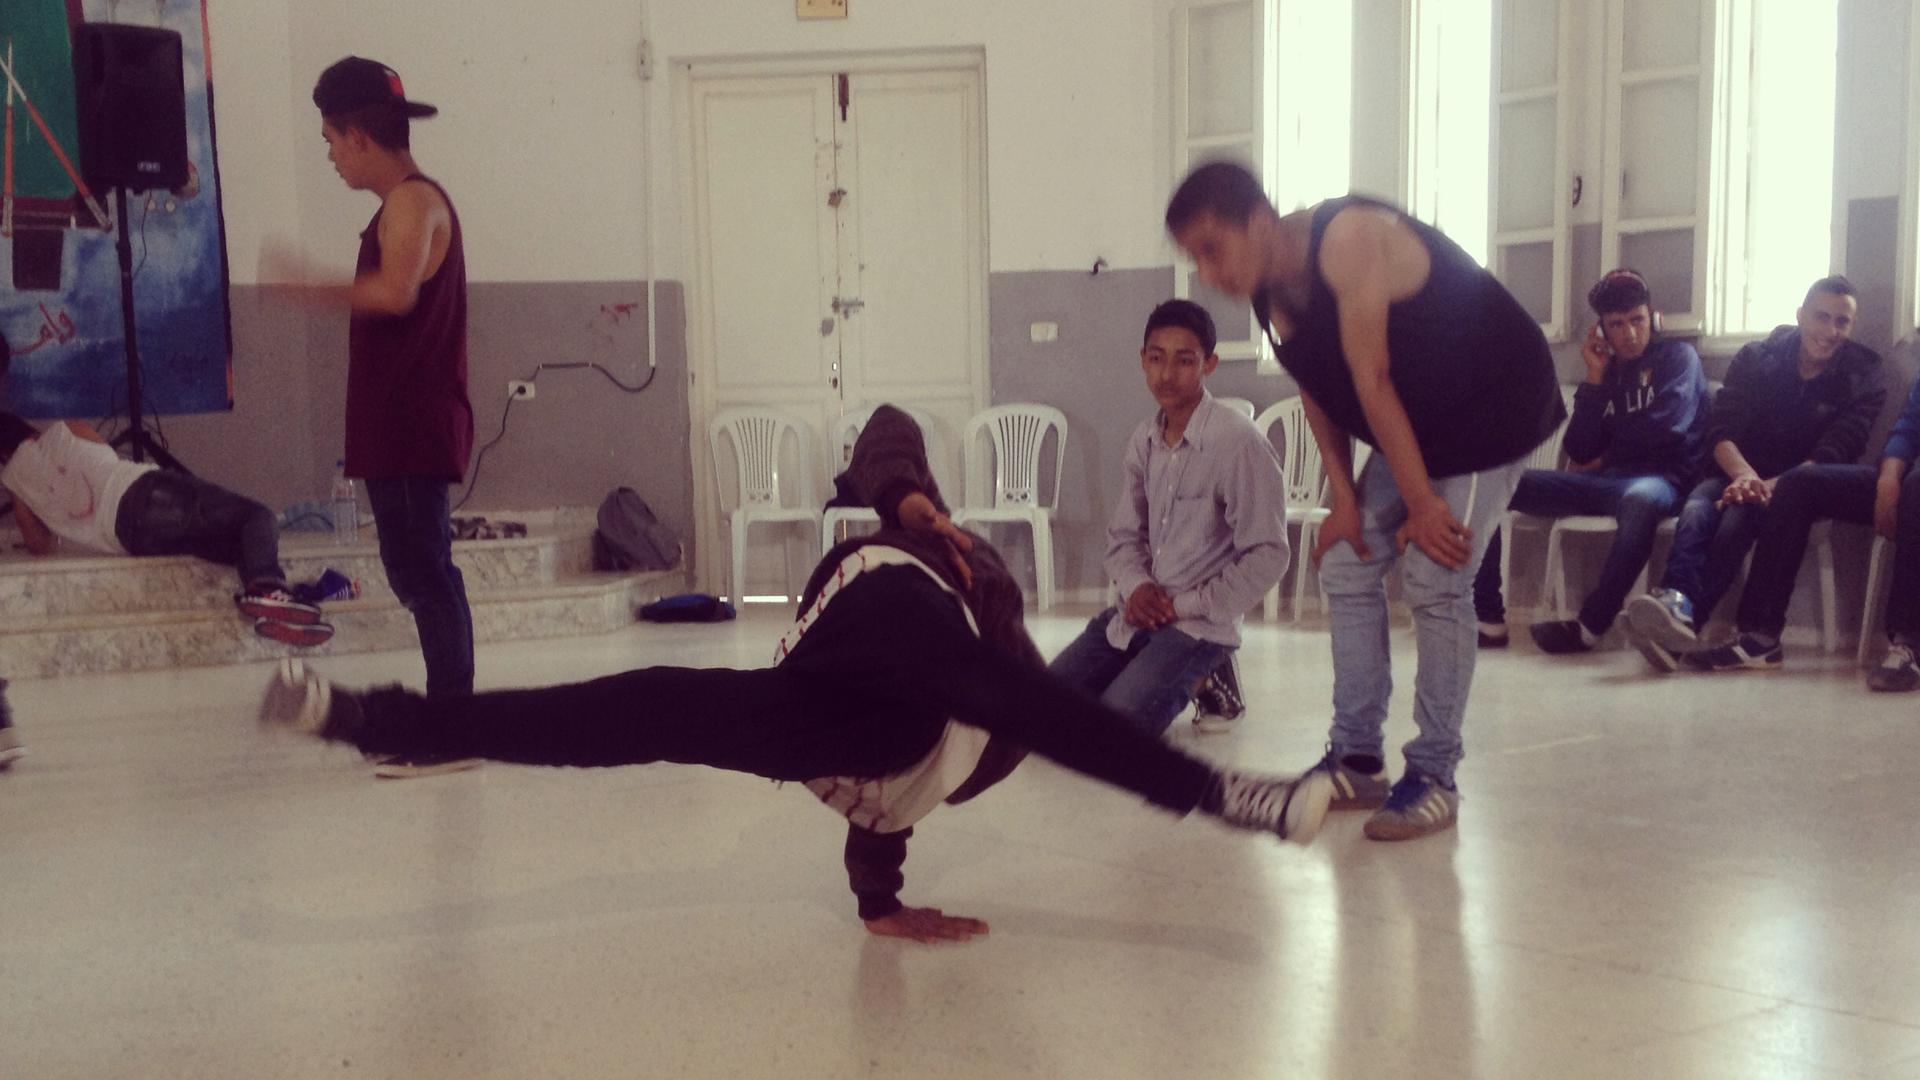 Nidhal Bouallagui's breakdance troupe practices their moves.